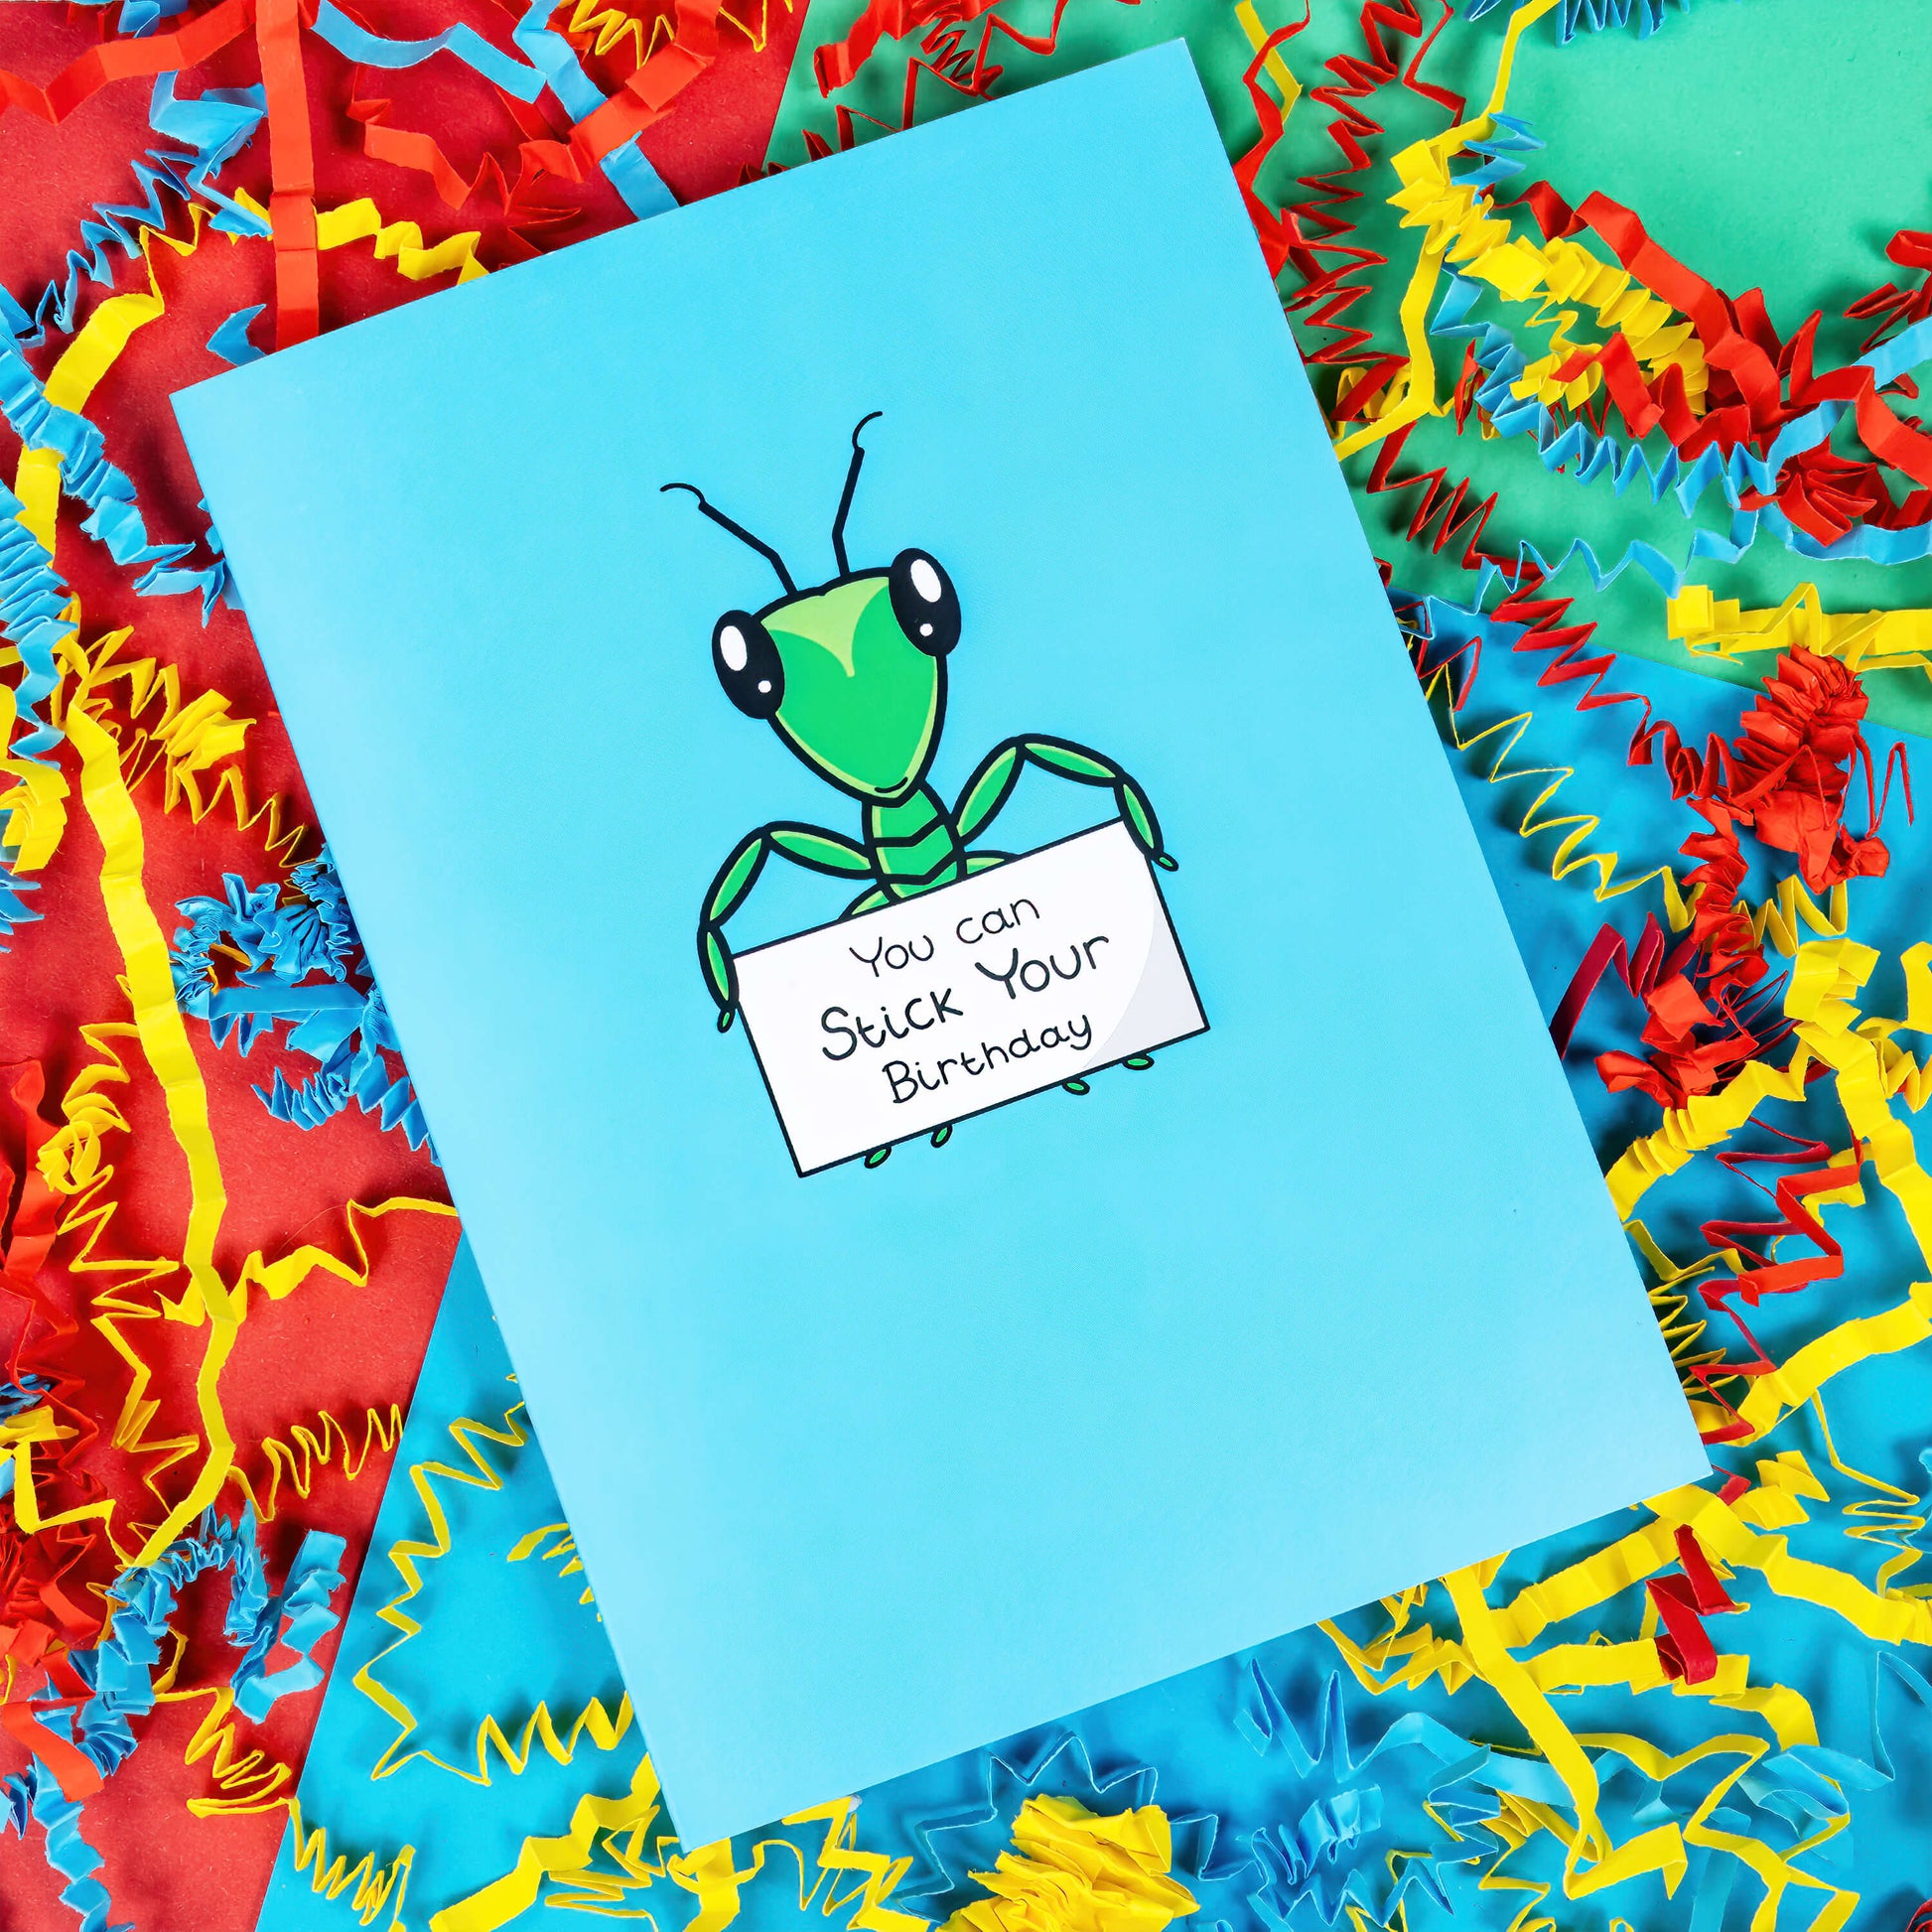 The You Can Stick Your Birthday Insect Card on a blue, green and red background with blue, yellow and red crinkle card confetti. The sky blue card has a green stick insect in the centre of it with big shiny eyes and two antennae on its head. The stick insect is holding a white sign that reads 'You can Stick Your Birthday' in black writing.